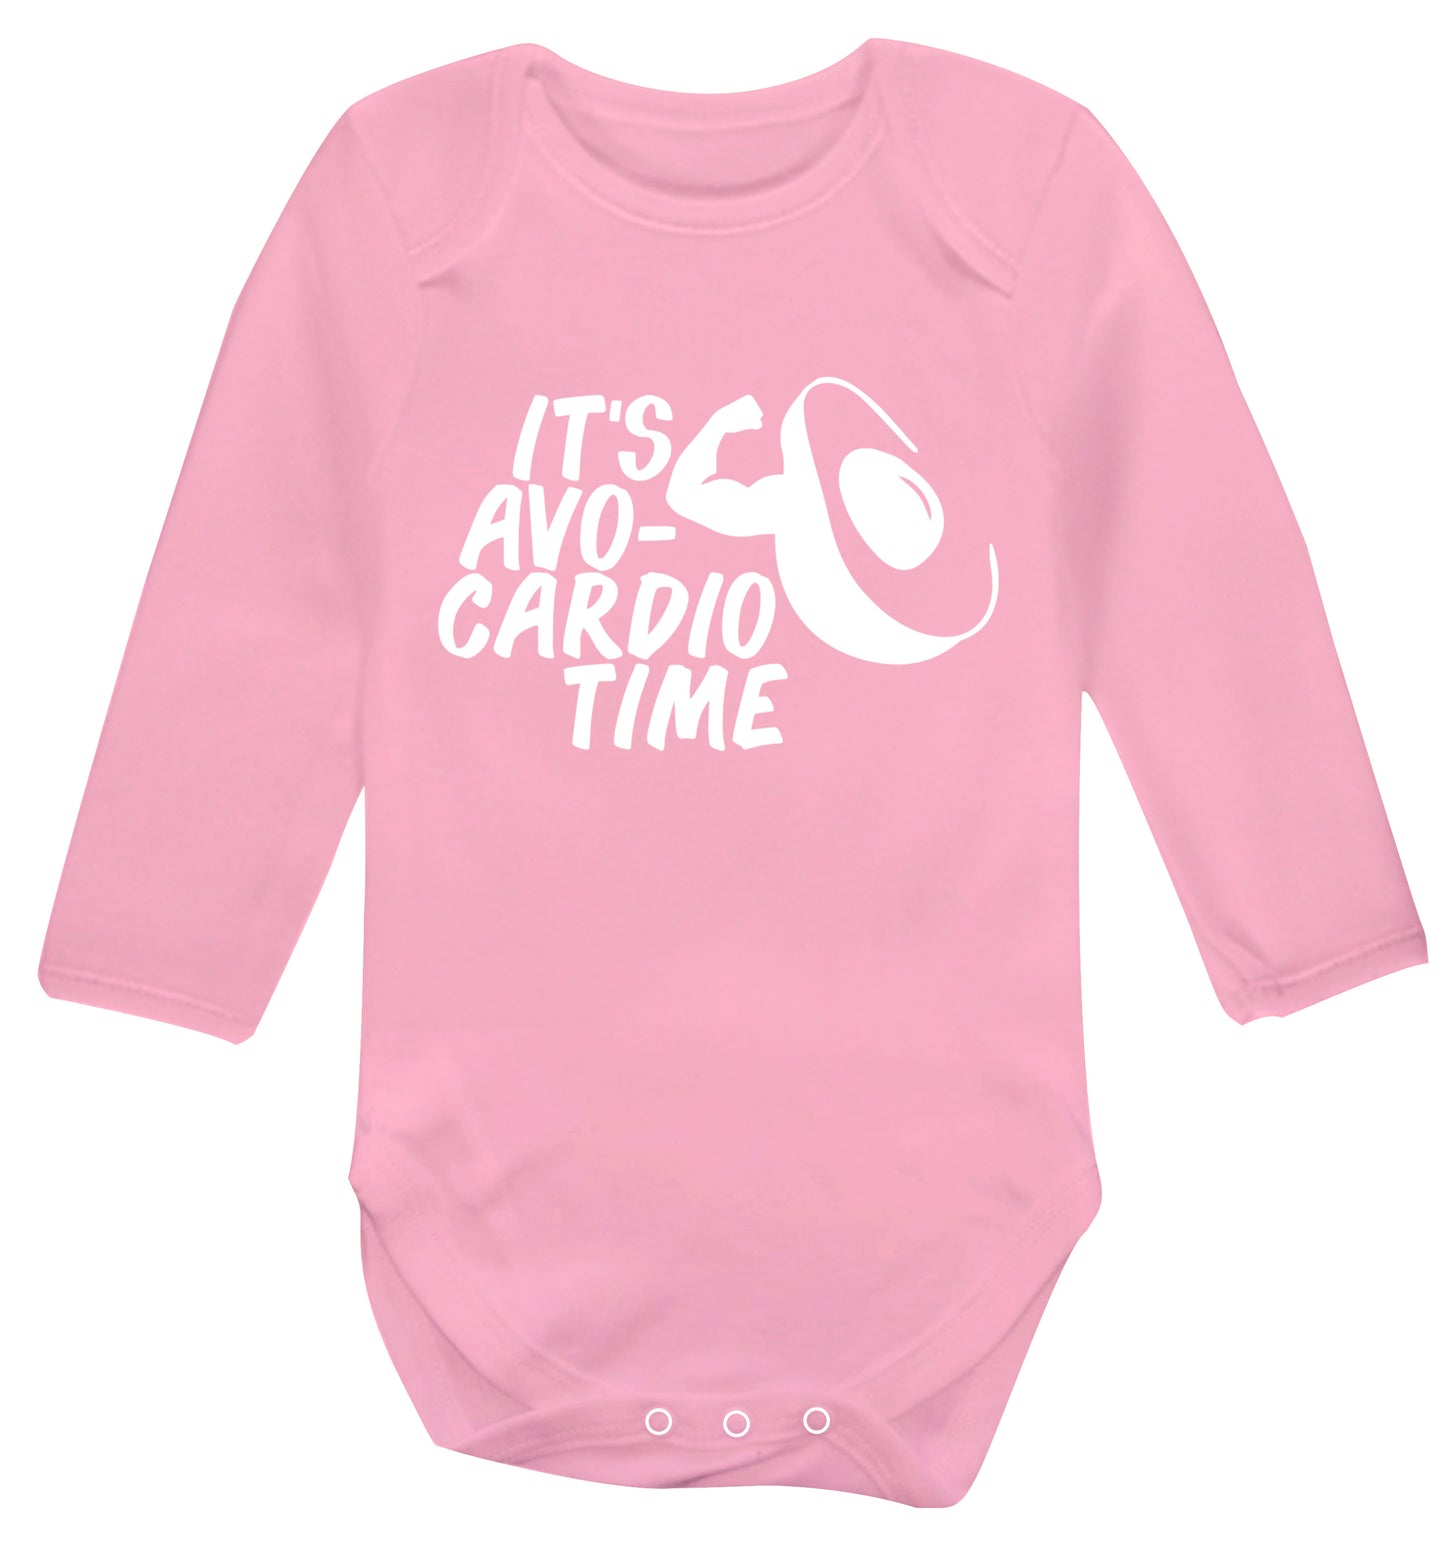 It's avo-cardio time Baby Vest long sleeved pale pink 6-12 months